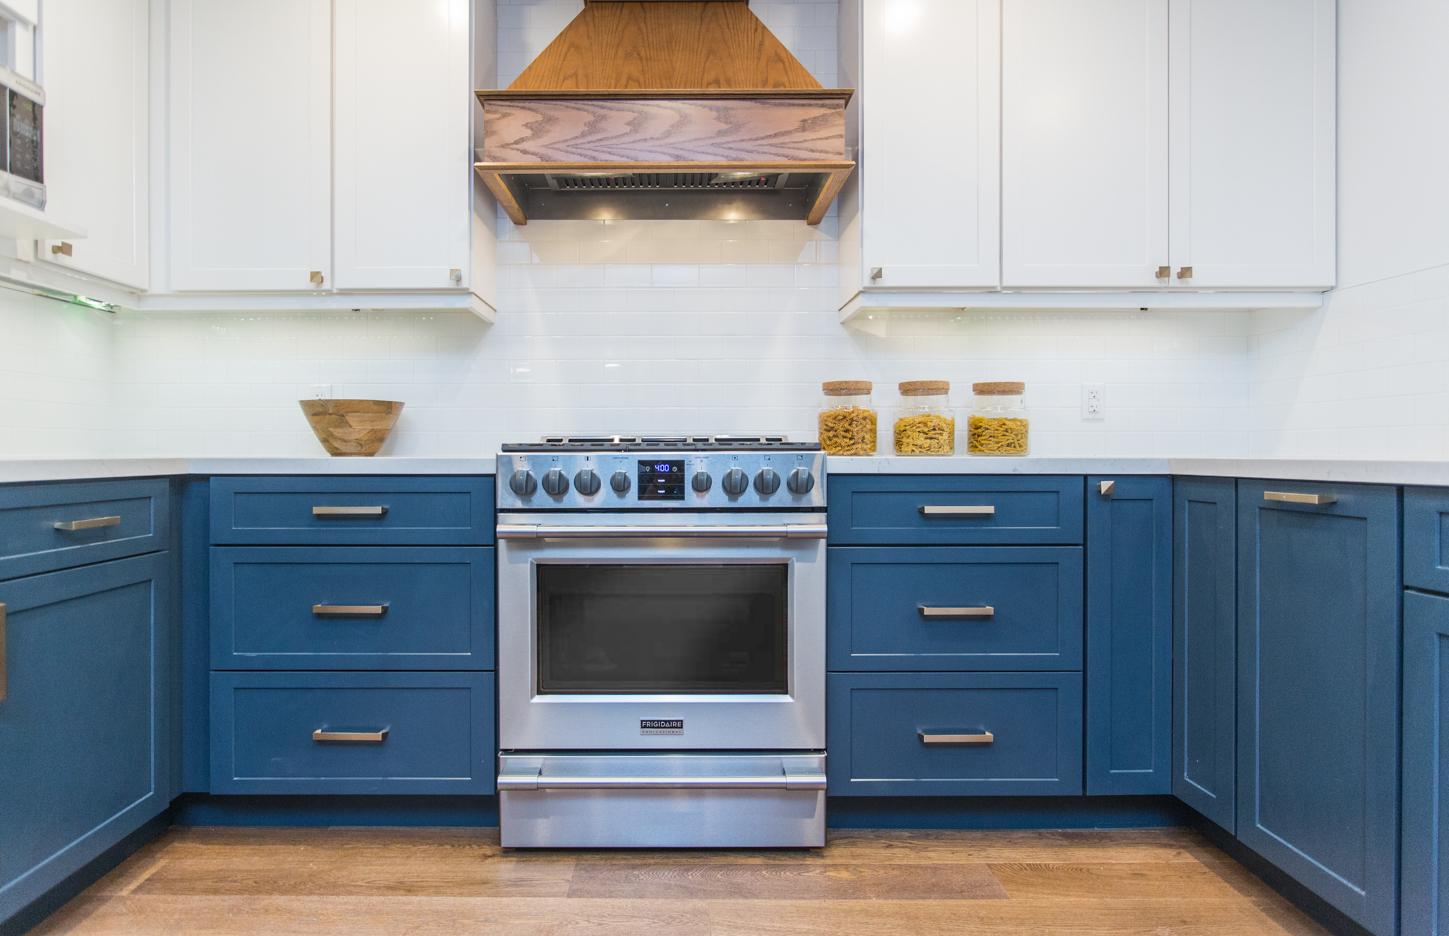 The rich blue of the lower cabinets grounds this custom cook’s kitchen, while the matching wooden hood vent and hardwood flooring creates a cohesive design aesthetic.